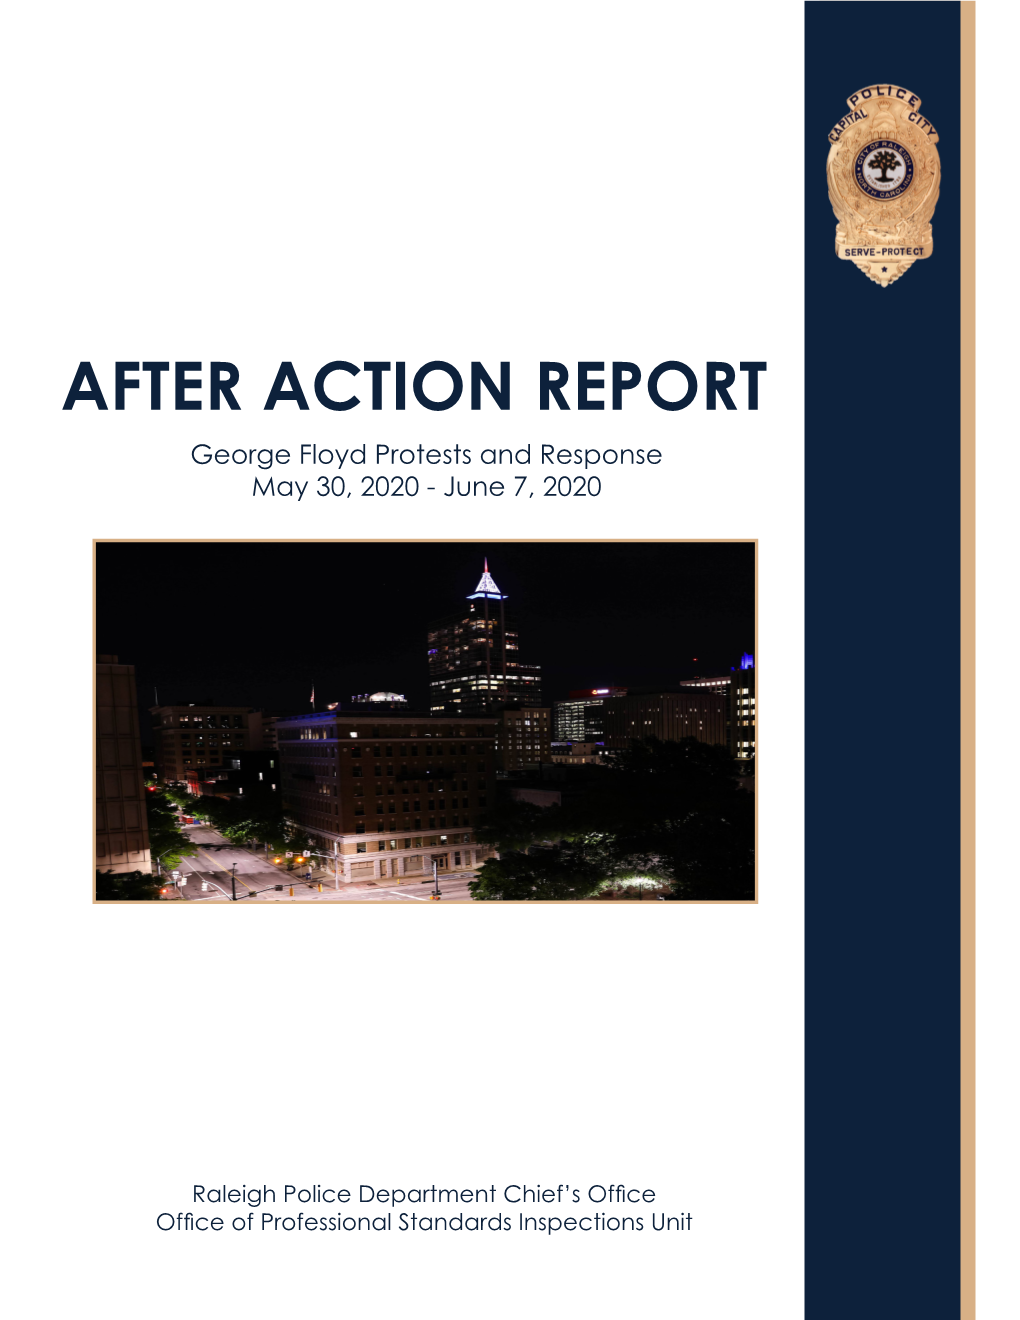 AFTER ACTION REPORT George Floyd Protests and Response May 30, 2020 - June 7, 2020